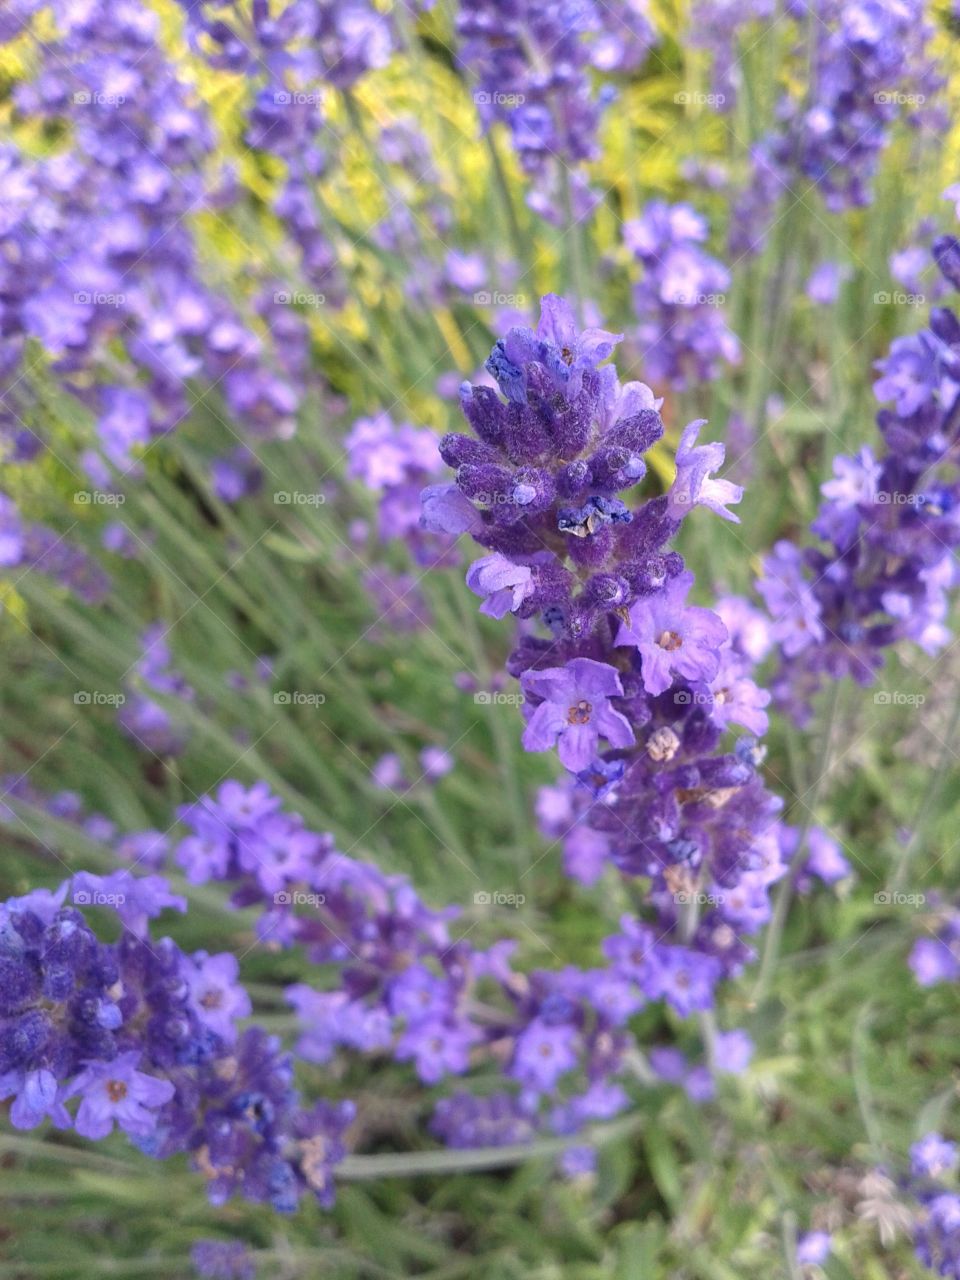 Lavender spikes. Behind every bloom is a secret love from days gone by.